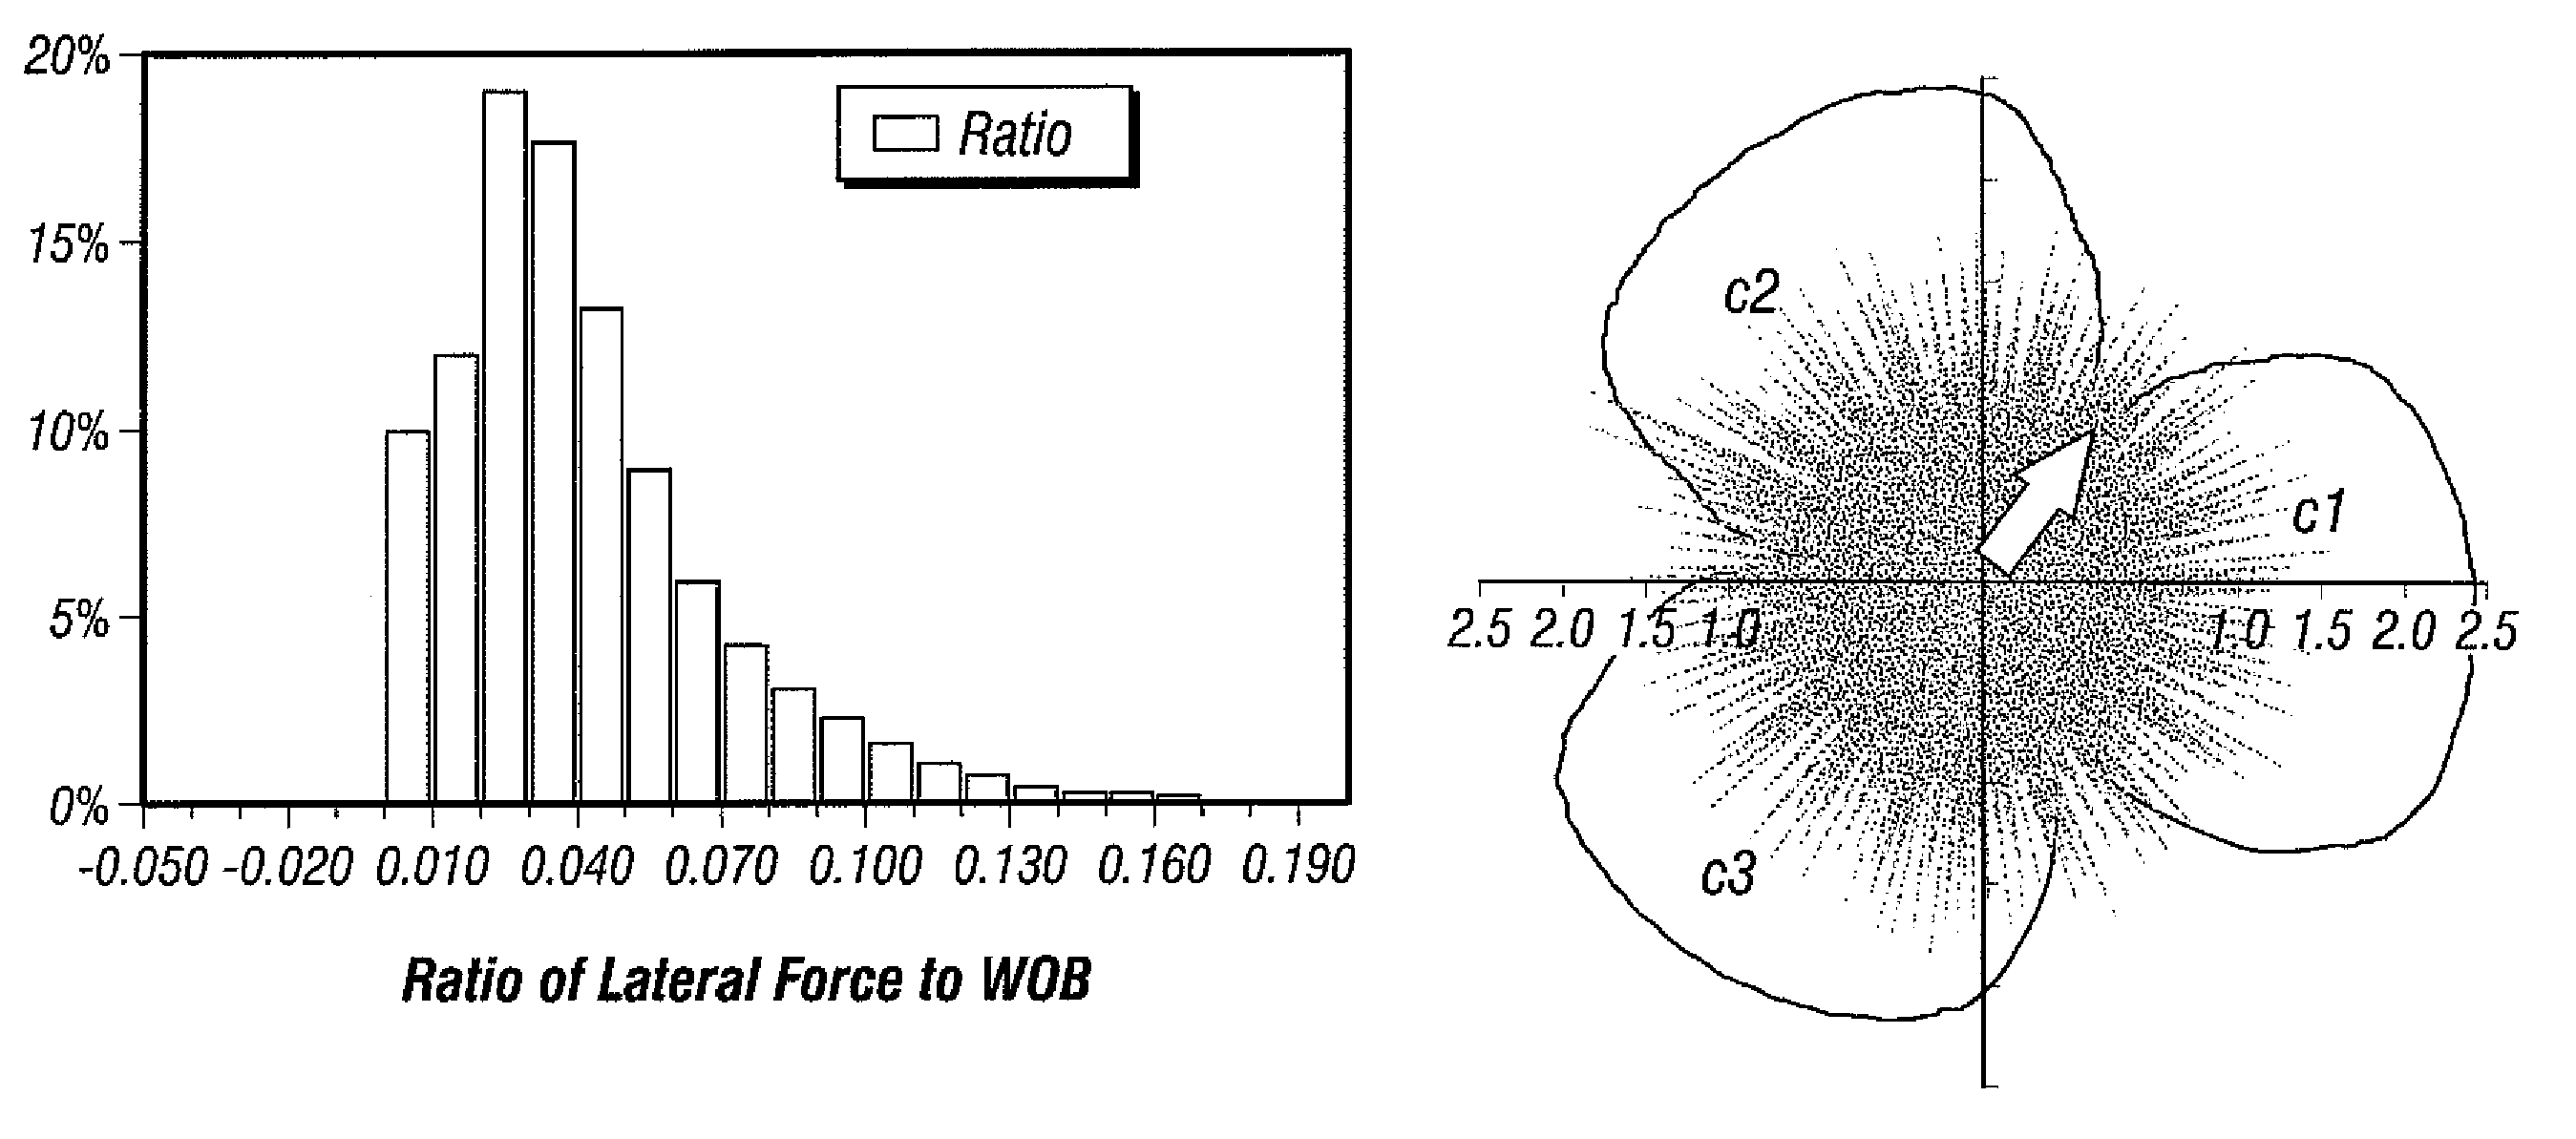 Radial force distributions in rock bits